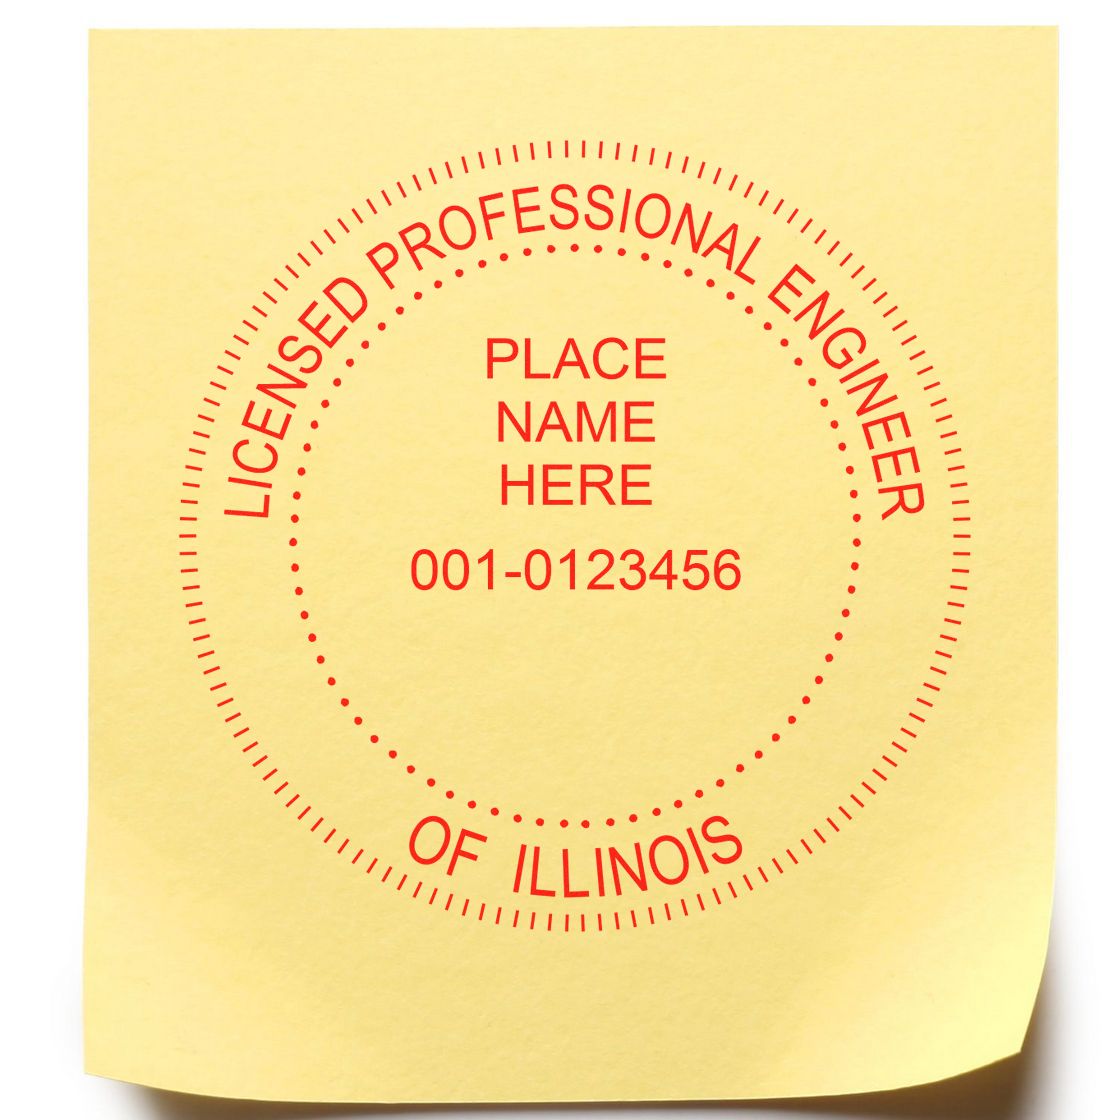 The main image for the Illinois Professional Engineer Seal Stamp depicting a sample of the imprint and electronic files